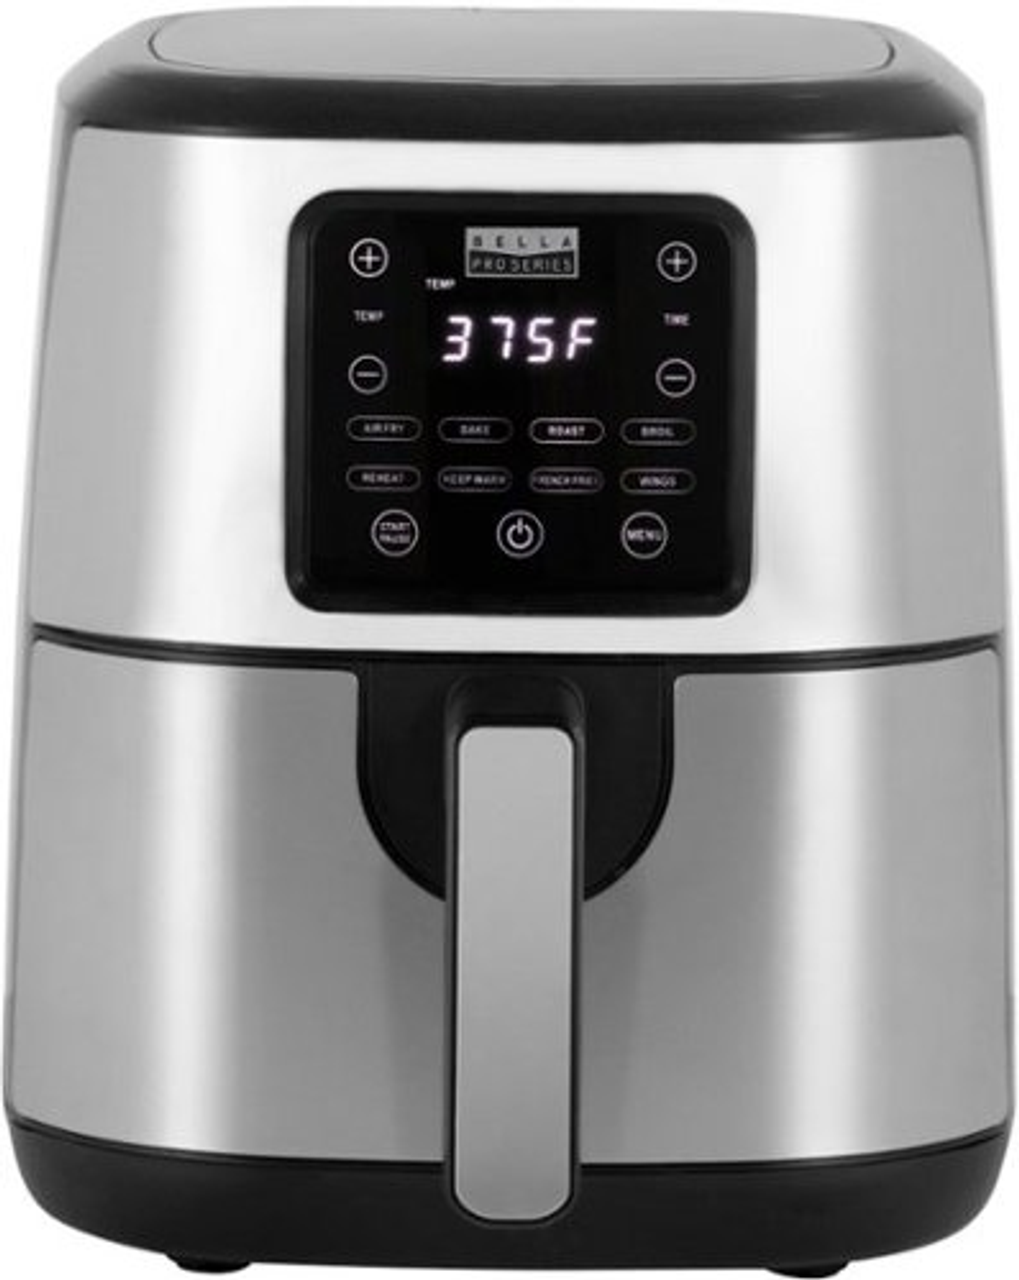 Bella Pro Series - 4.2-qt. Digital Air Fryer with Stainless Steel Finish - Stainless Steel